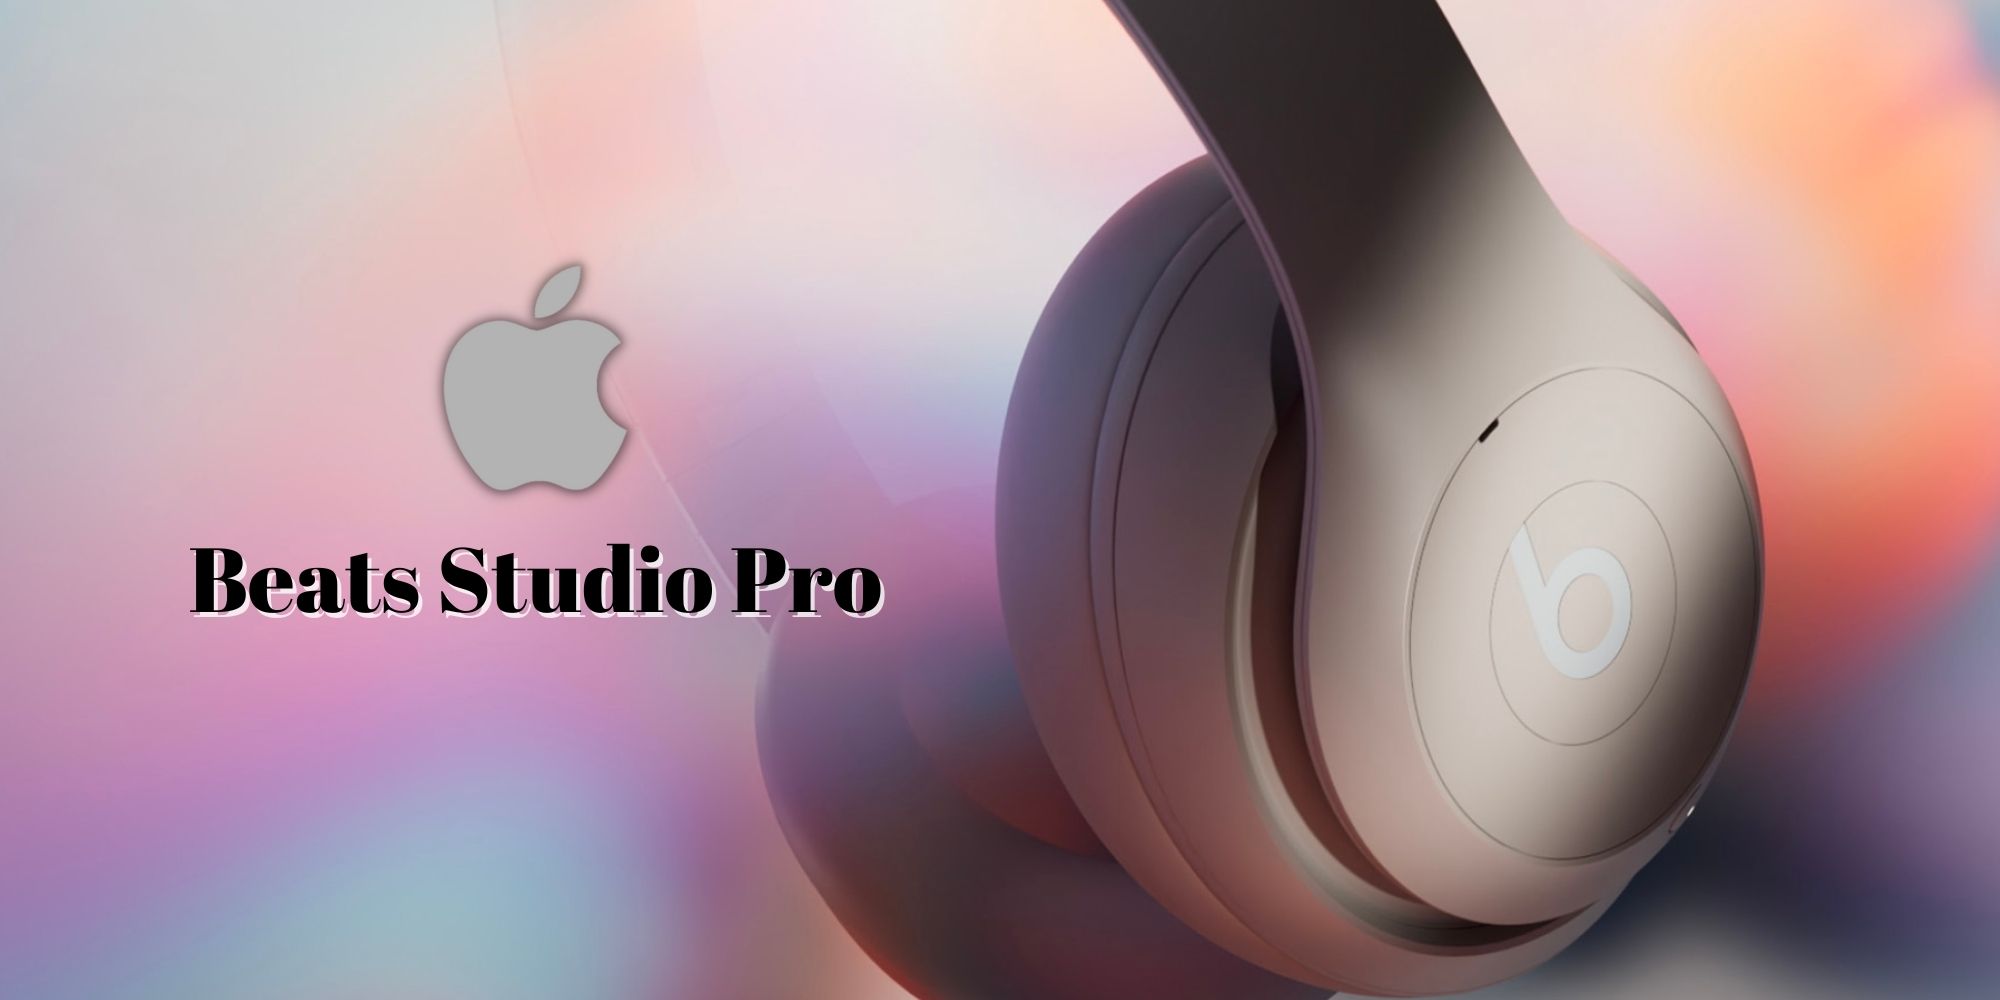 Representation of the all new Beats Studio Pro headphones over a colorful background with the Apple logo